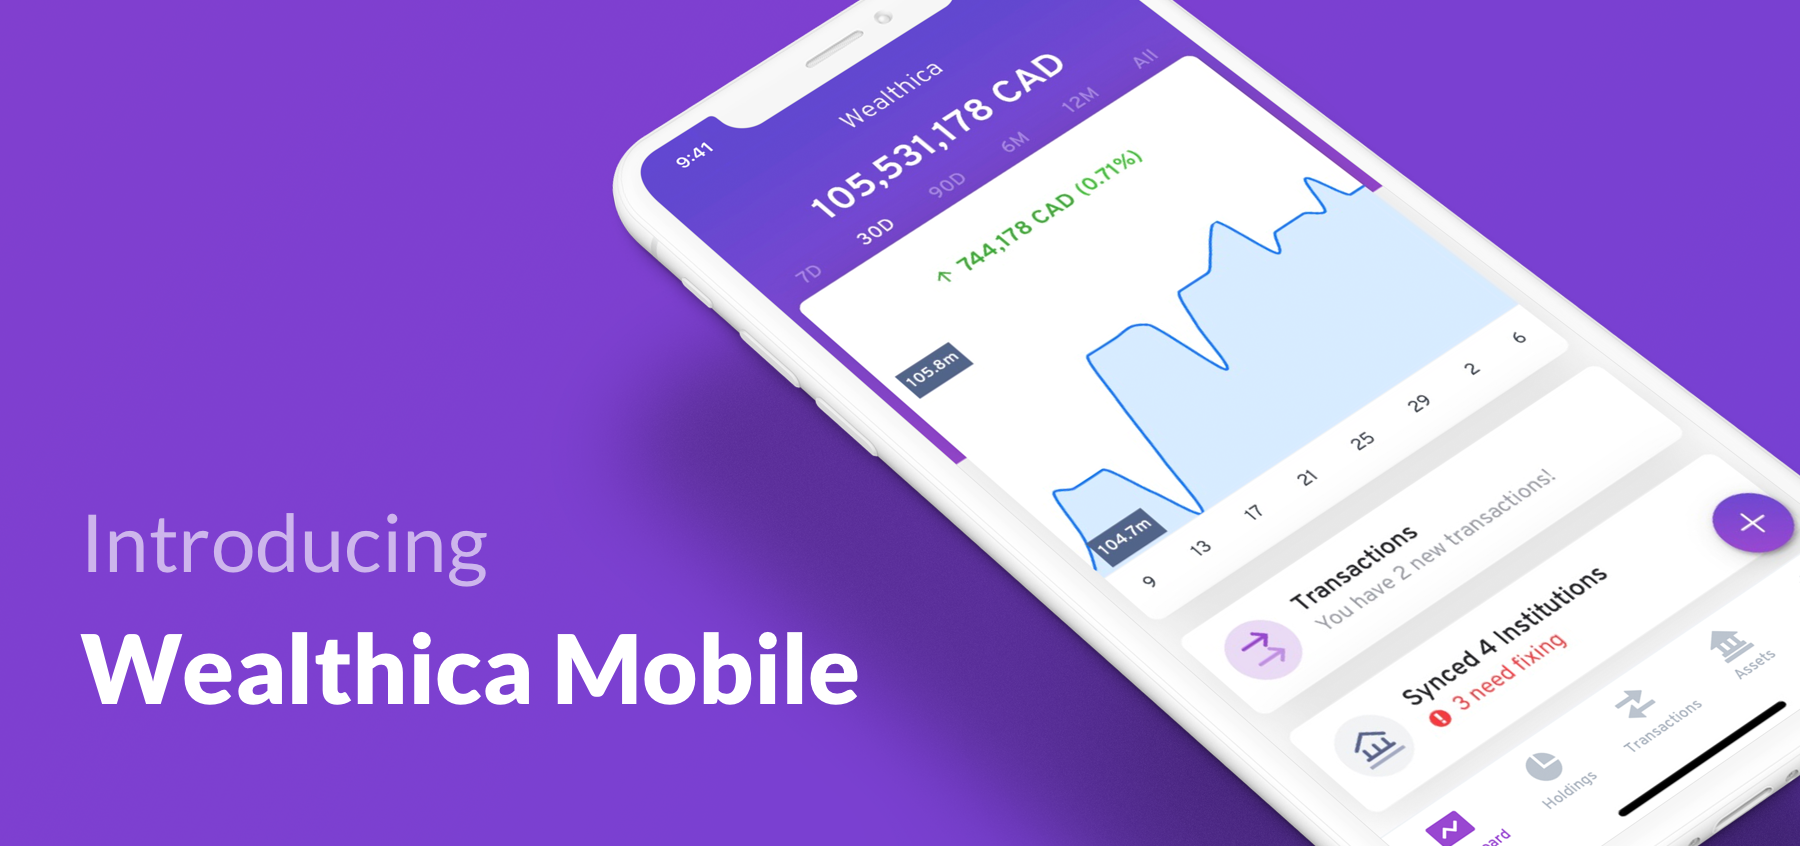 Wealthica Mobile